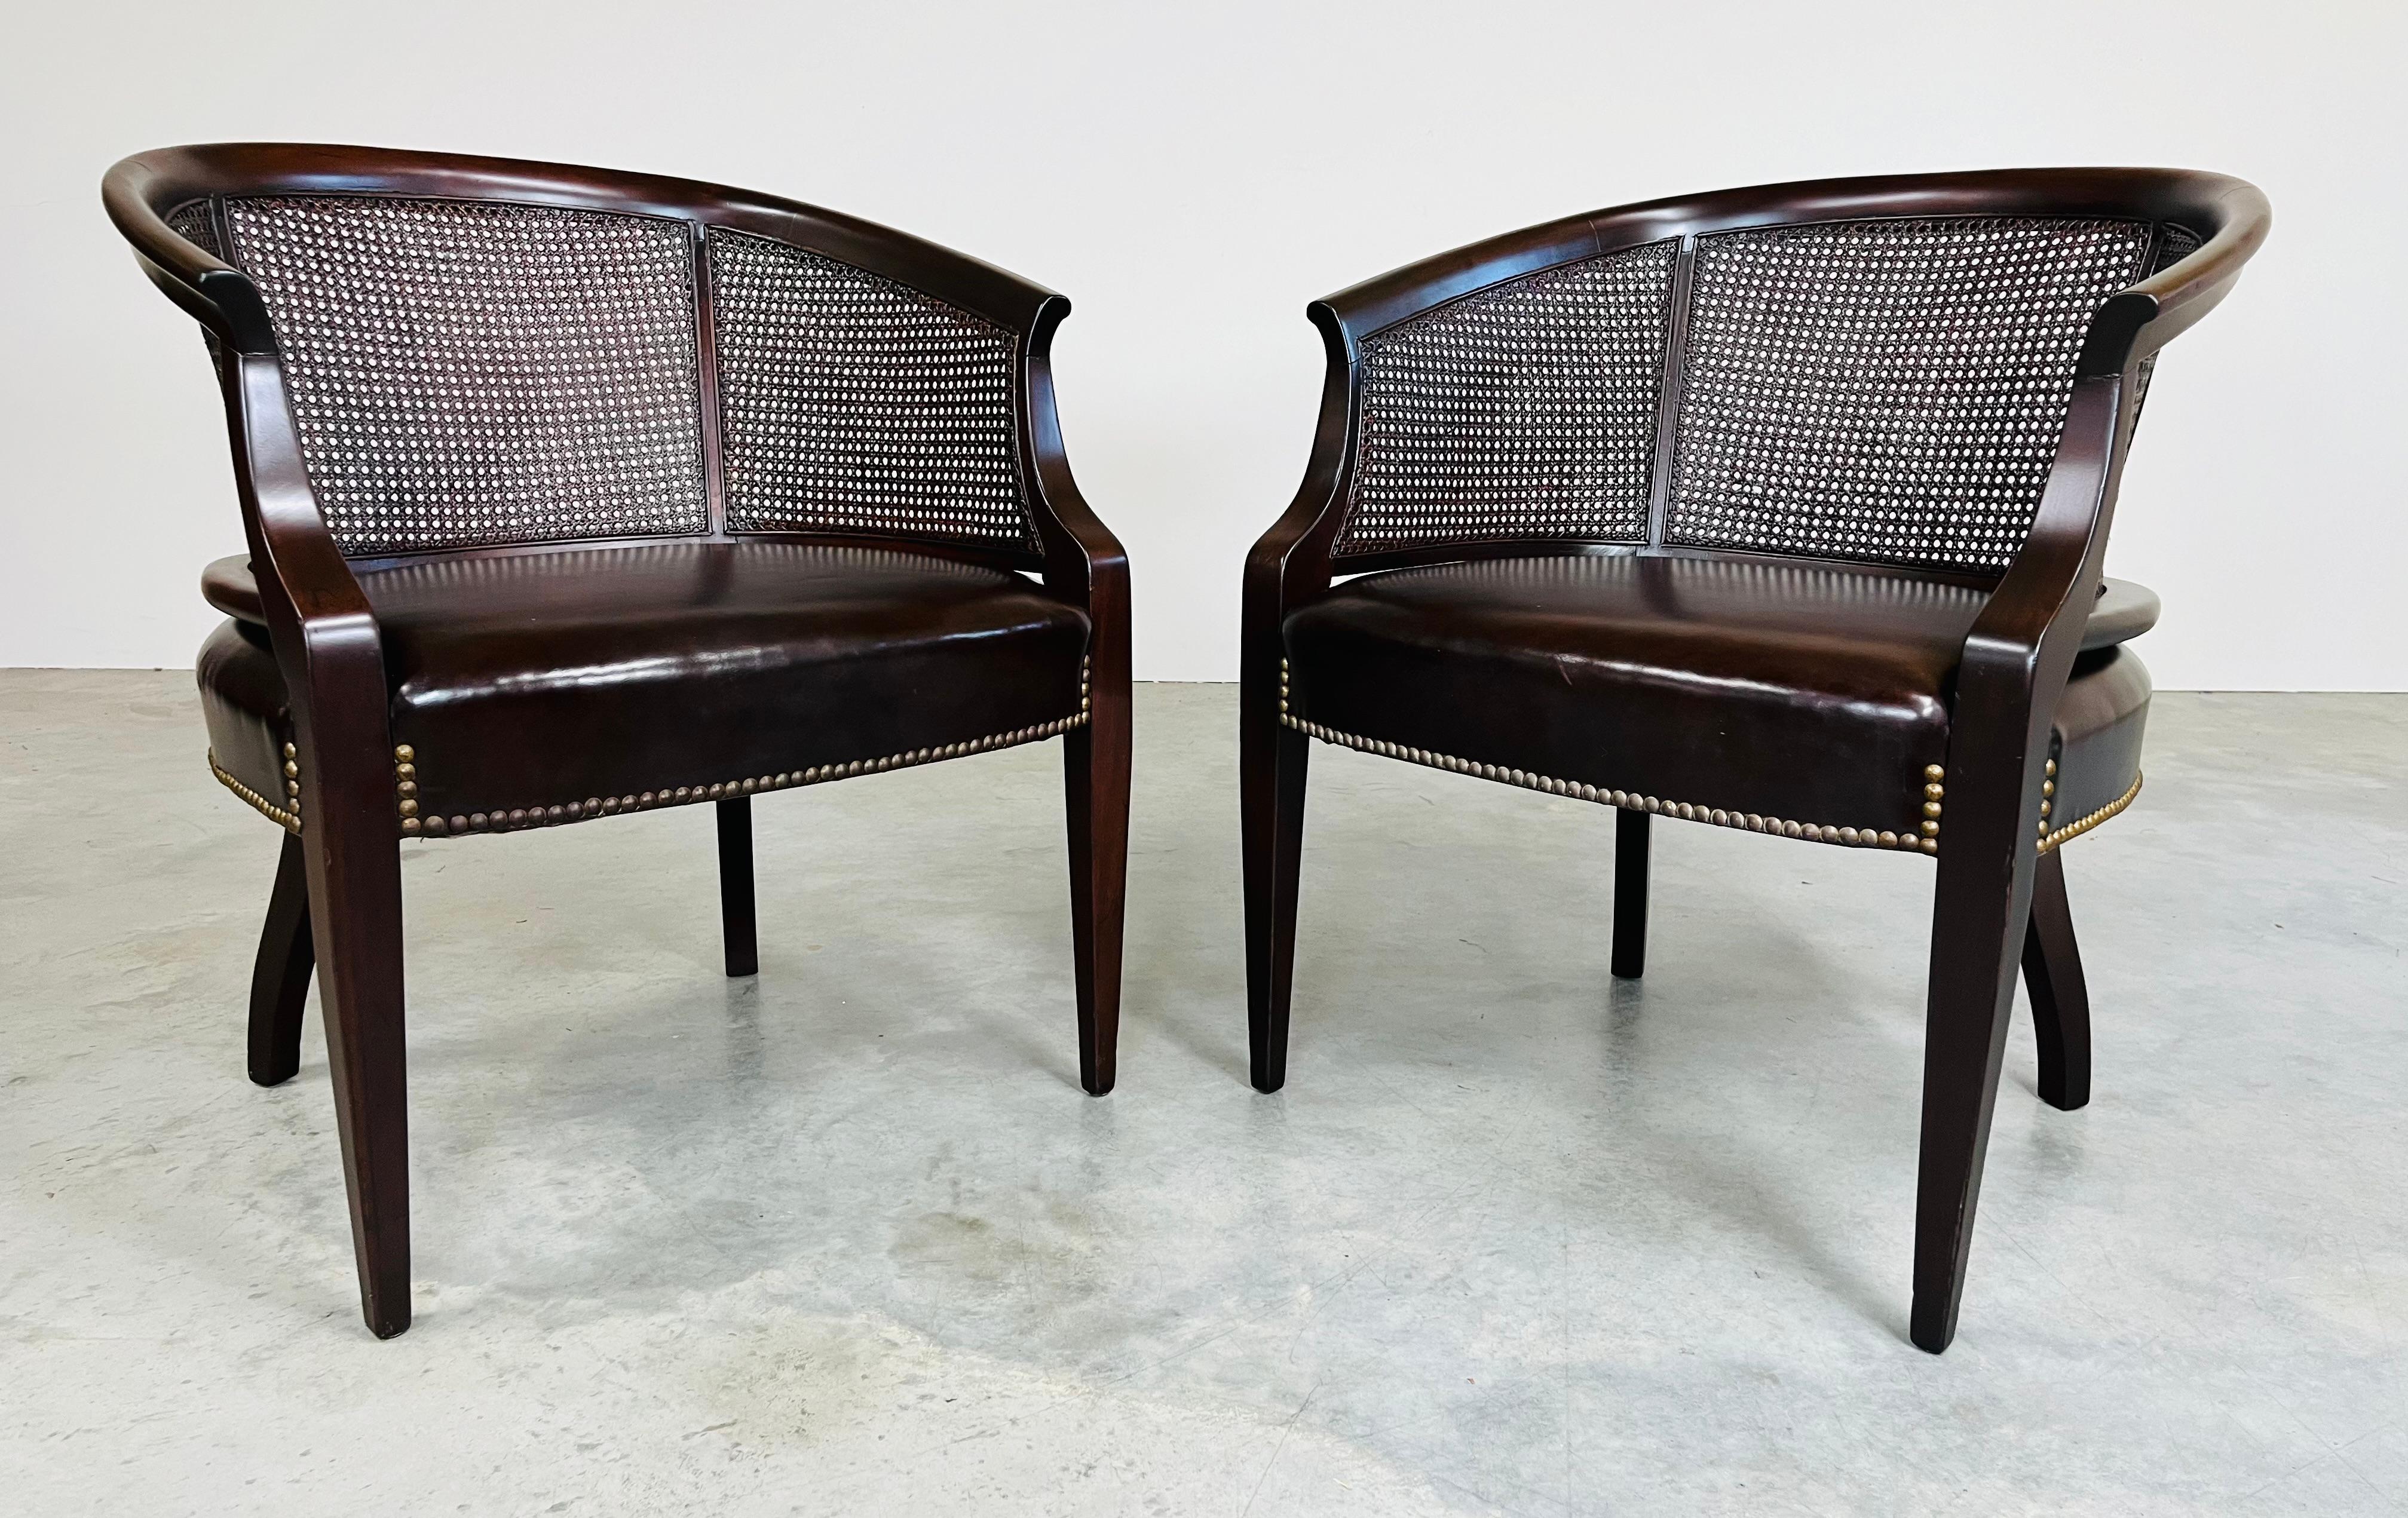 Leather Pair of Regency Hickory Chair Co. Cane Barrel Back Club Chairs Having Lithe Legs For Sale